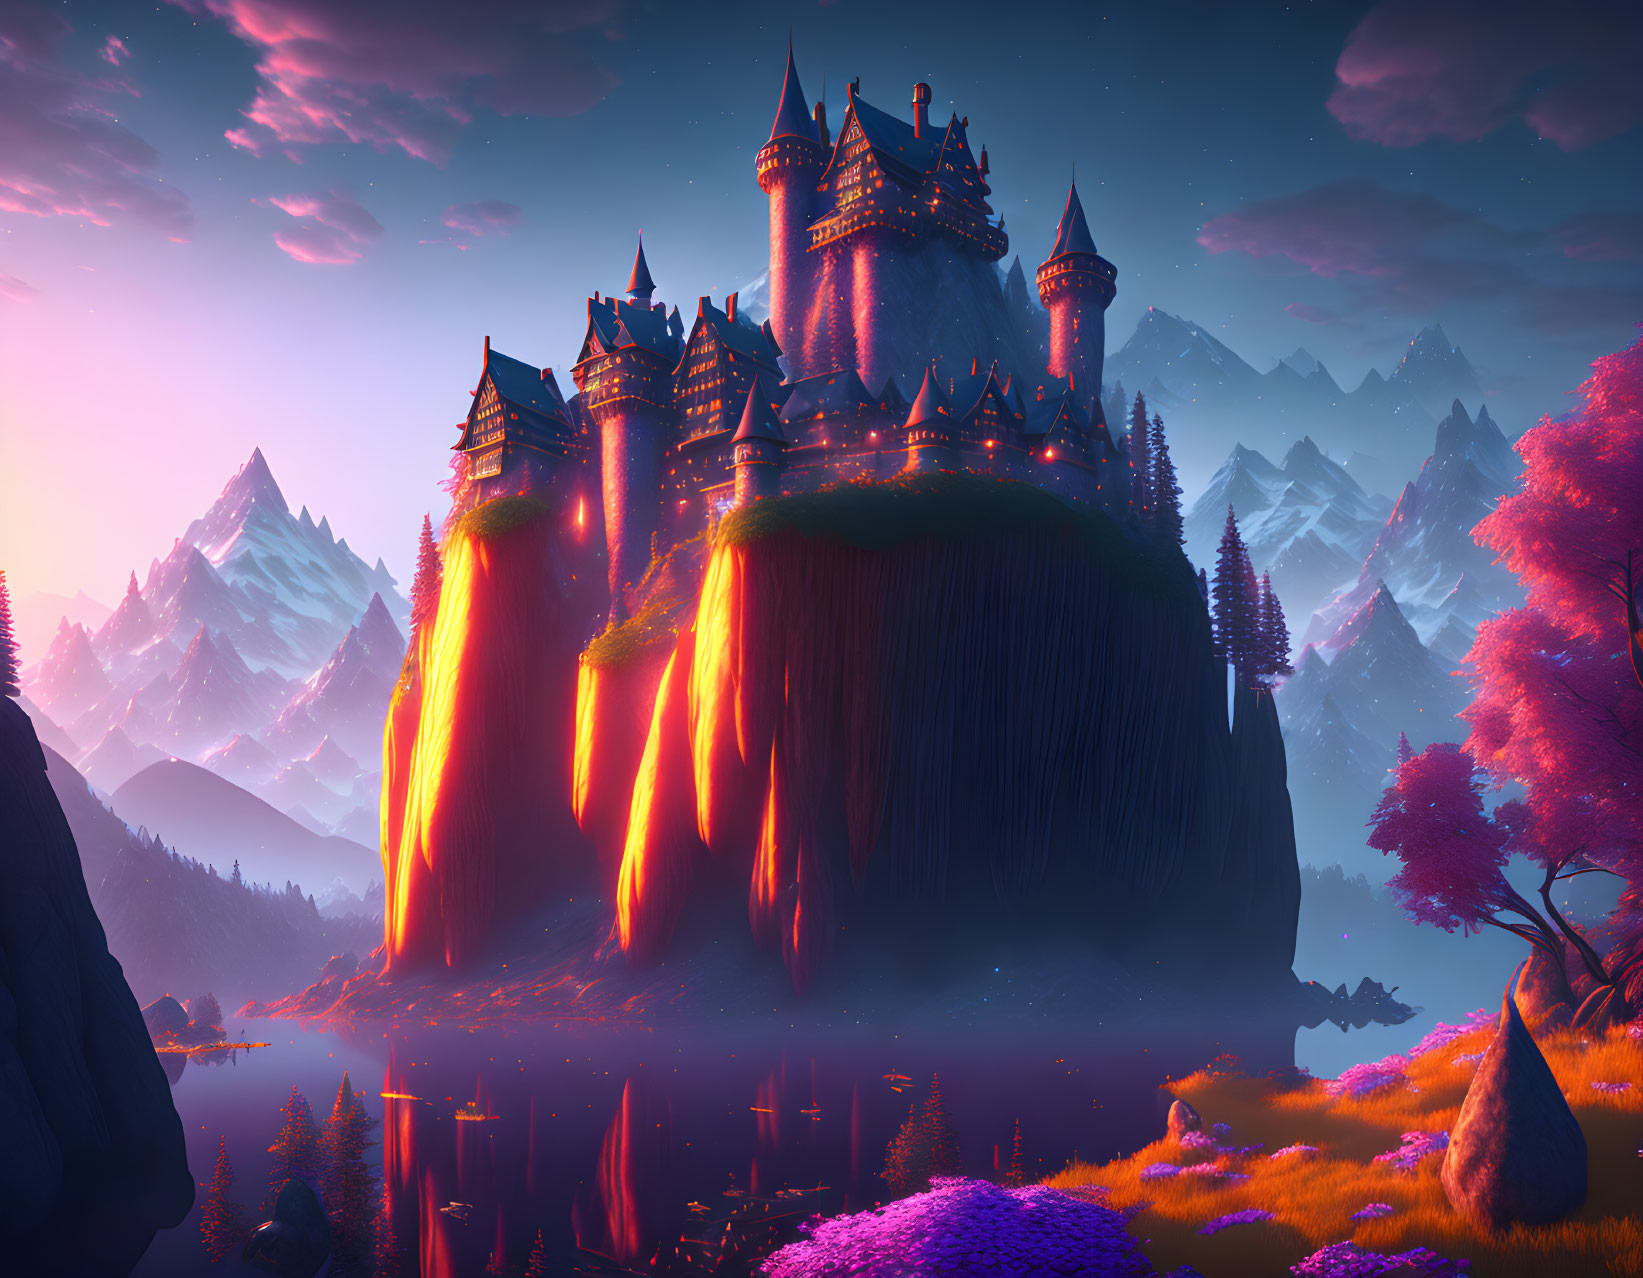 Fantasy castle on steep cliff with lava waterfalls under twilight sky